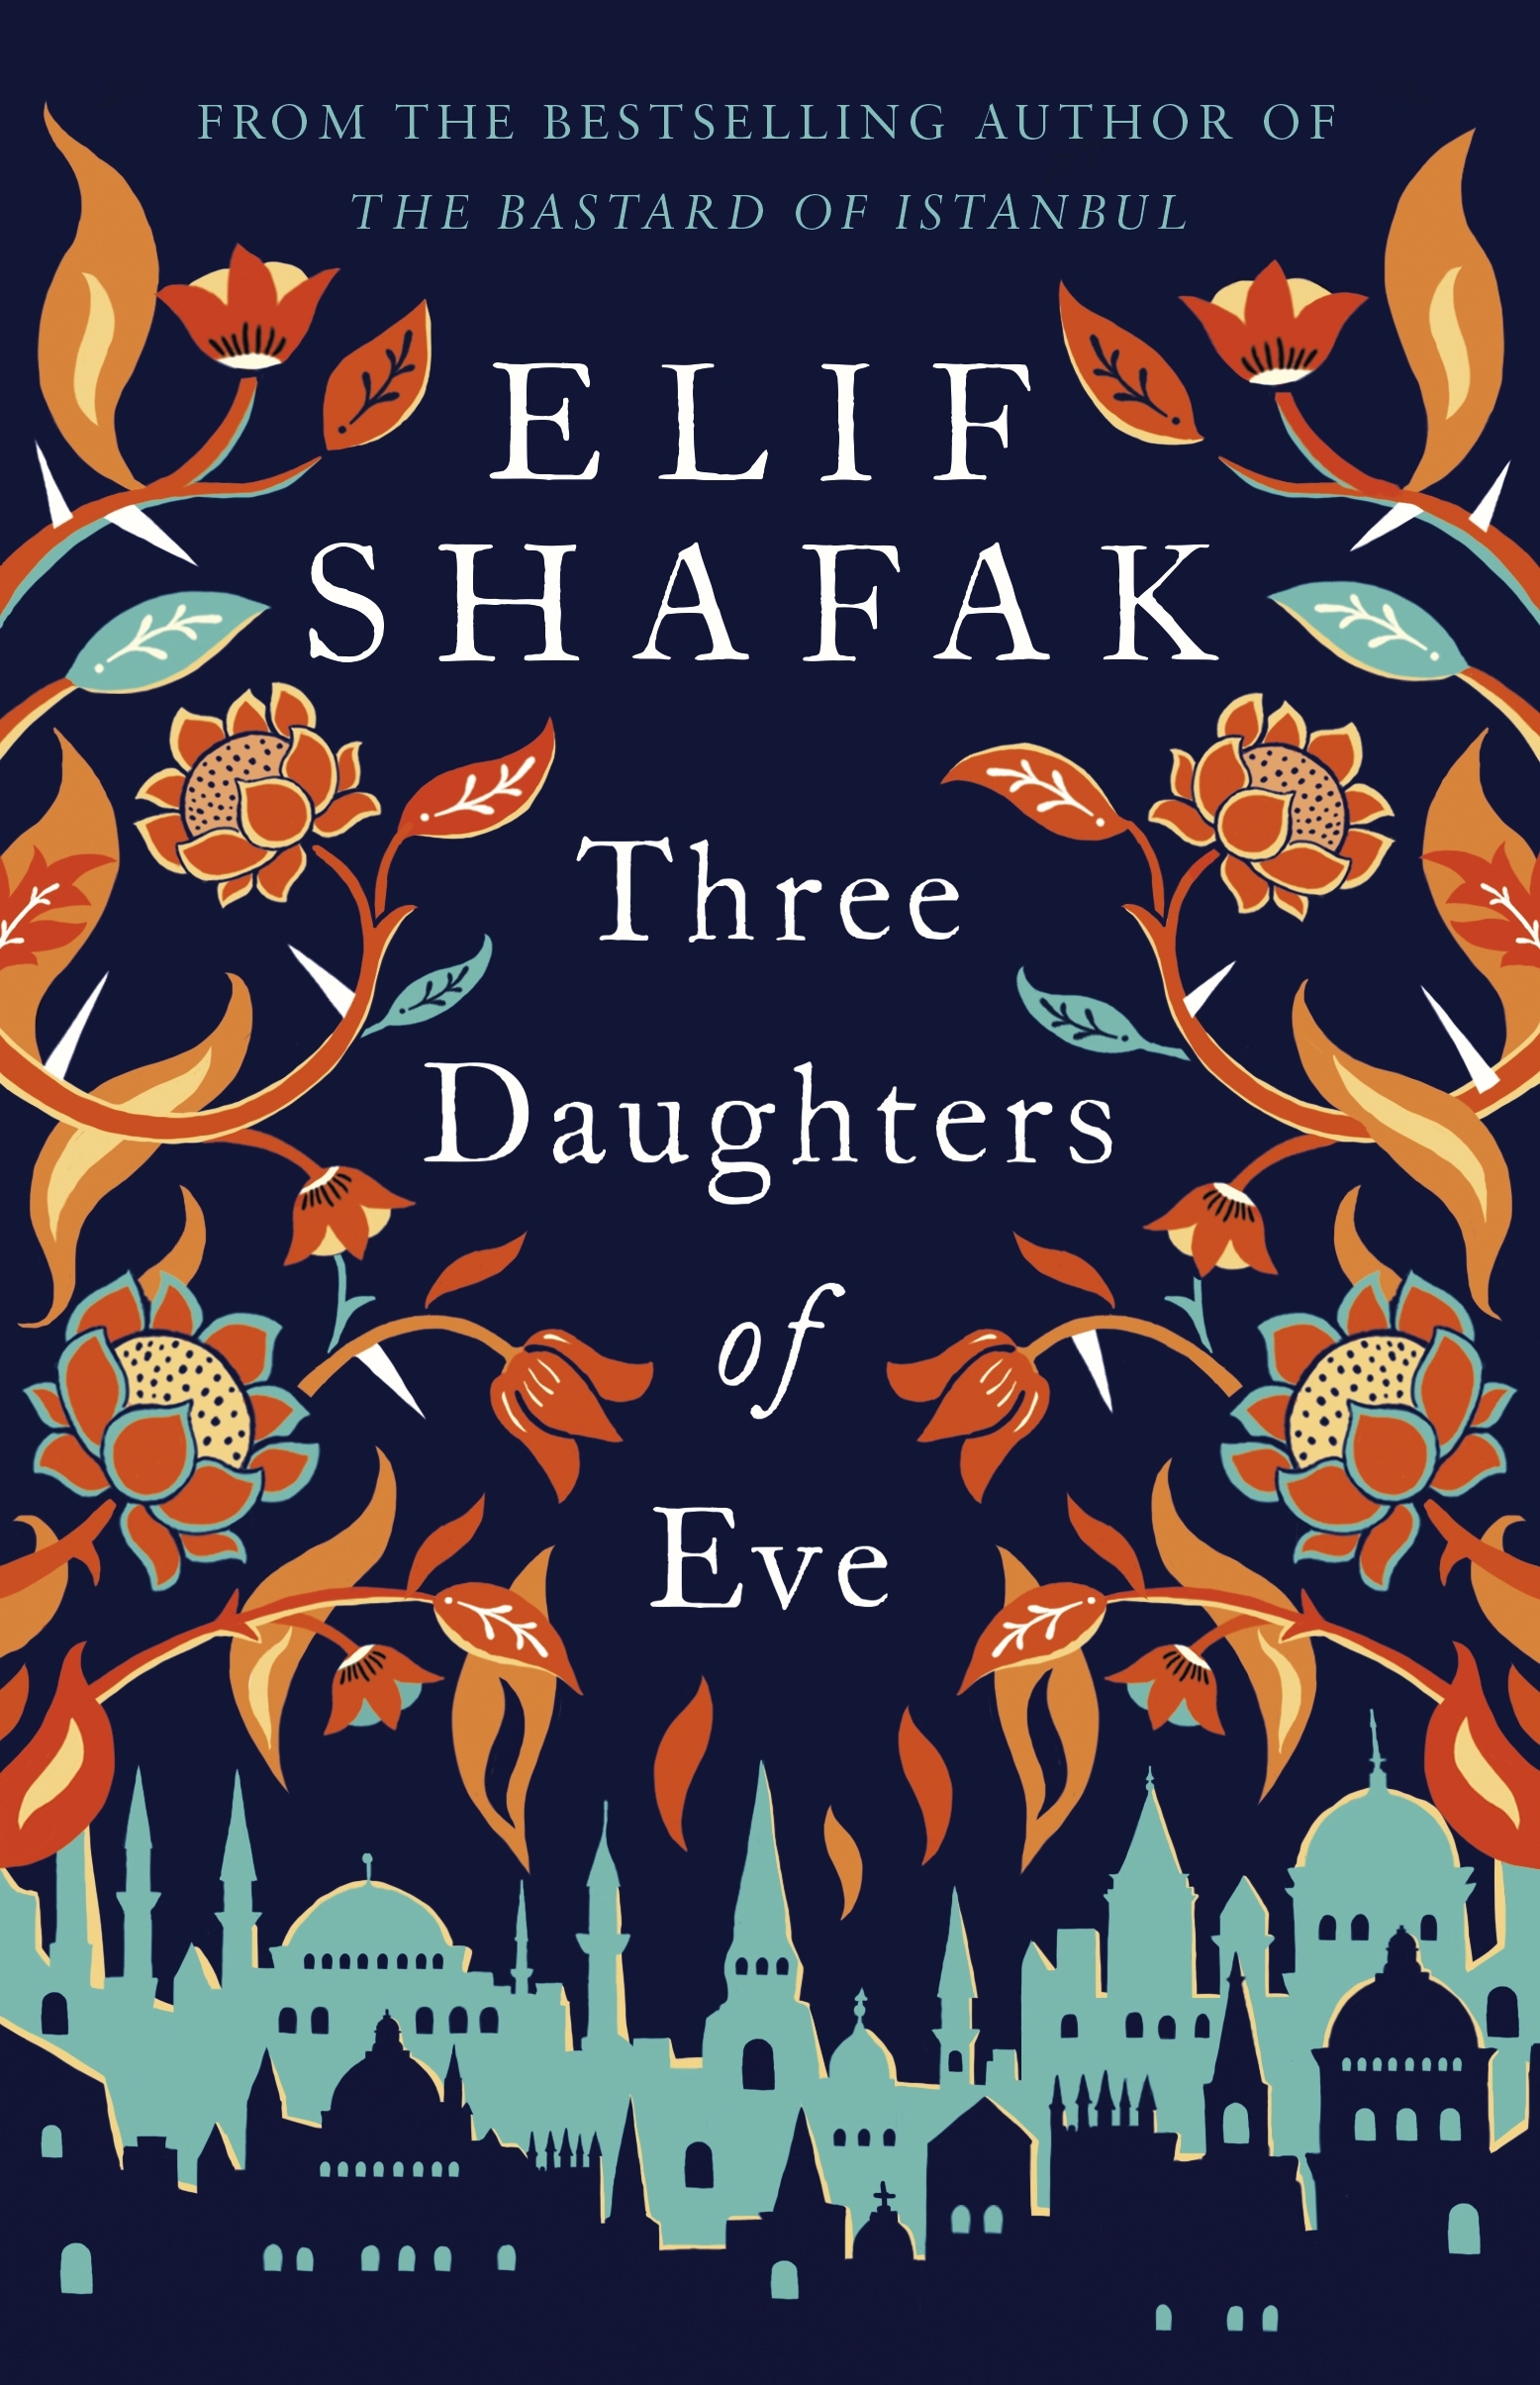 elif Shafak's "Three Daughters of Eve" (published by Viking)